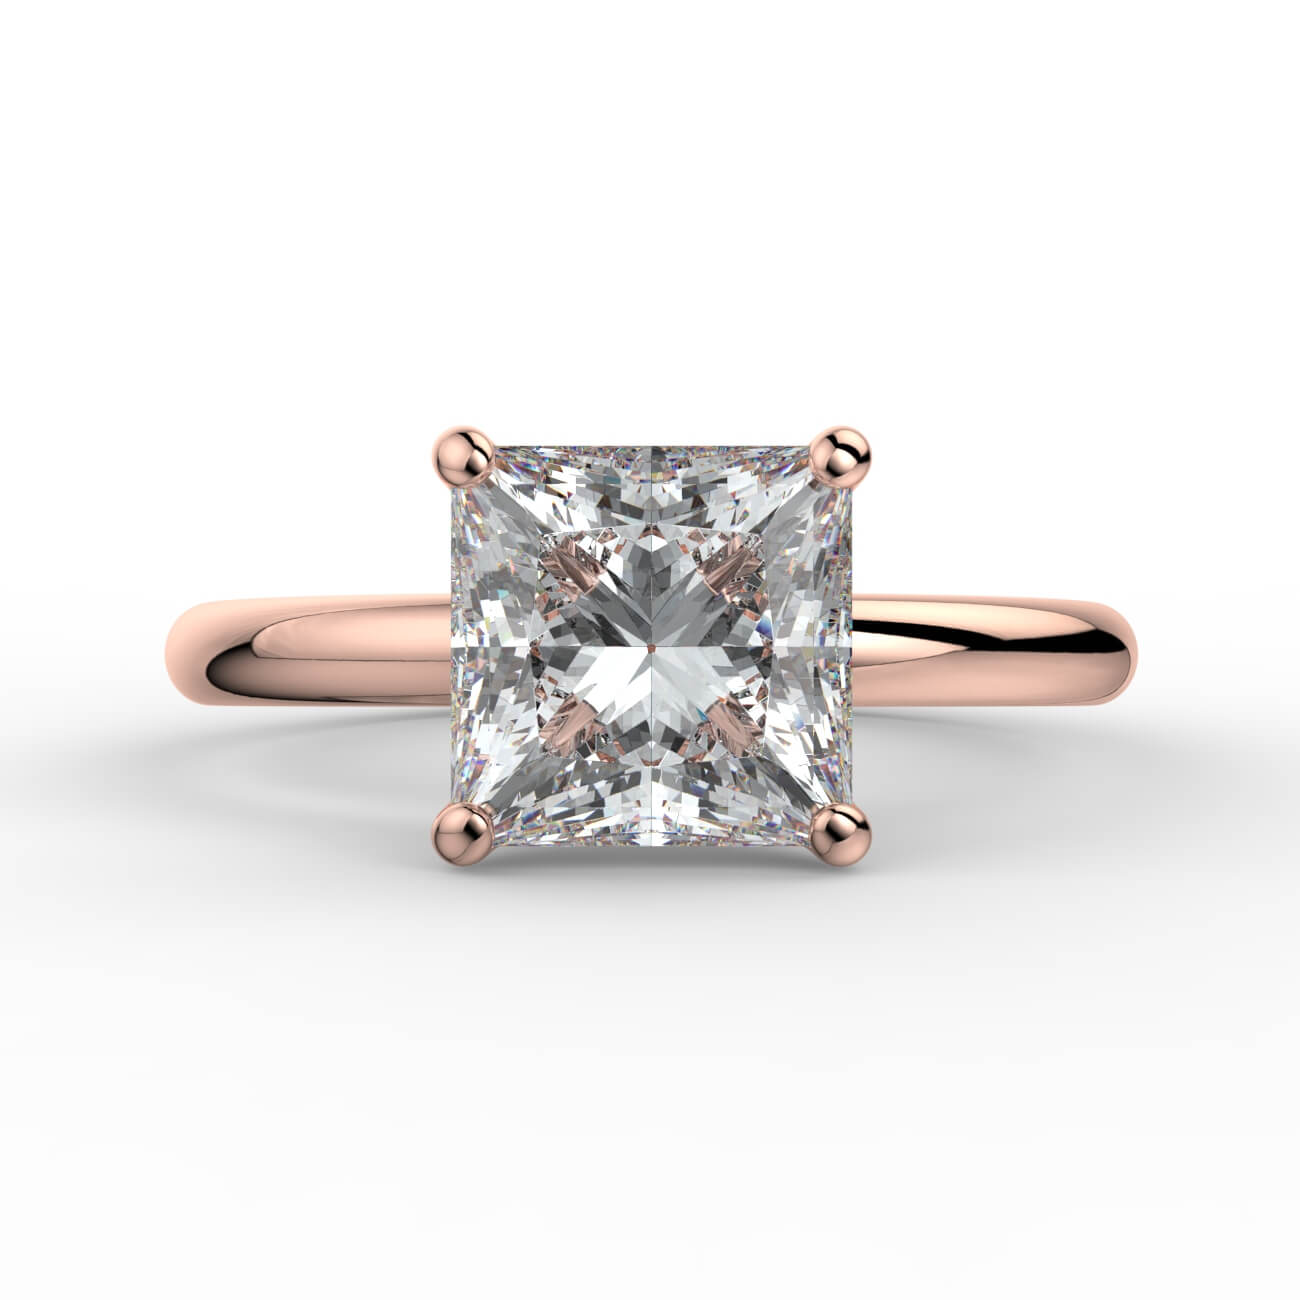 Comfort fit 4 claw princess cut solitaire diamond ring in rose gold – Australian Diamond Network